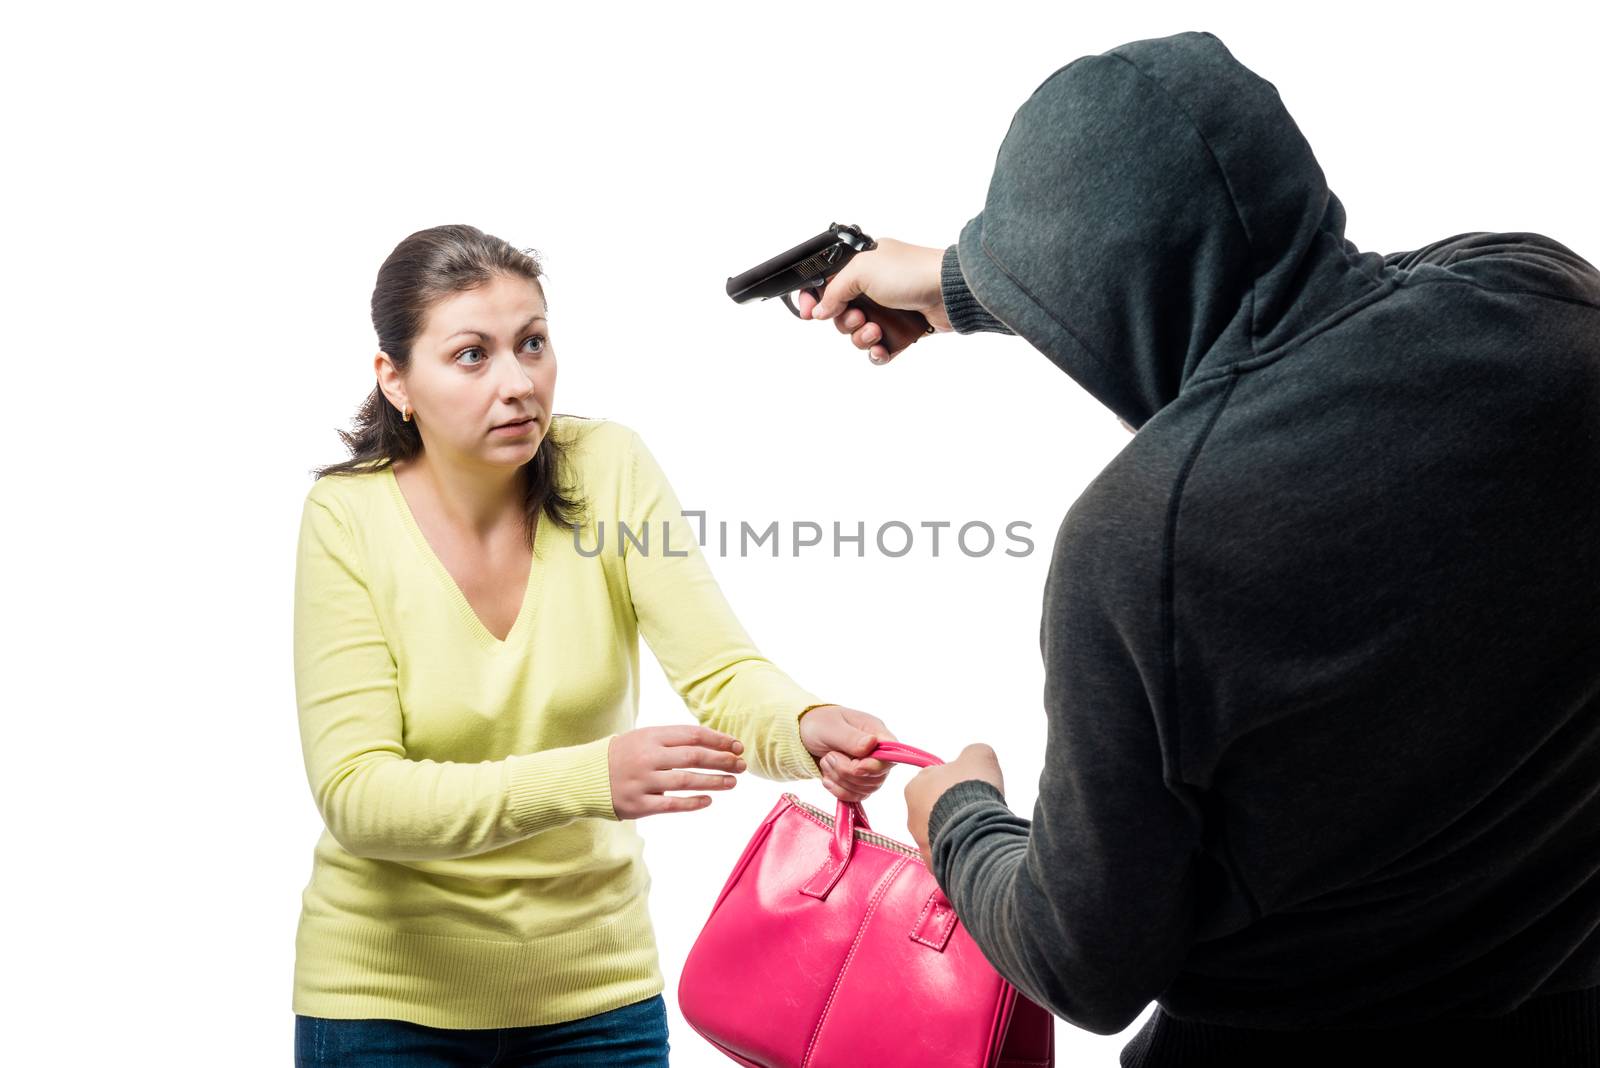 Armed robber and victim with a bag on a white background by kosmsos111